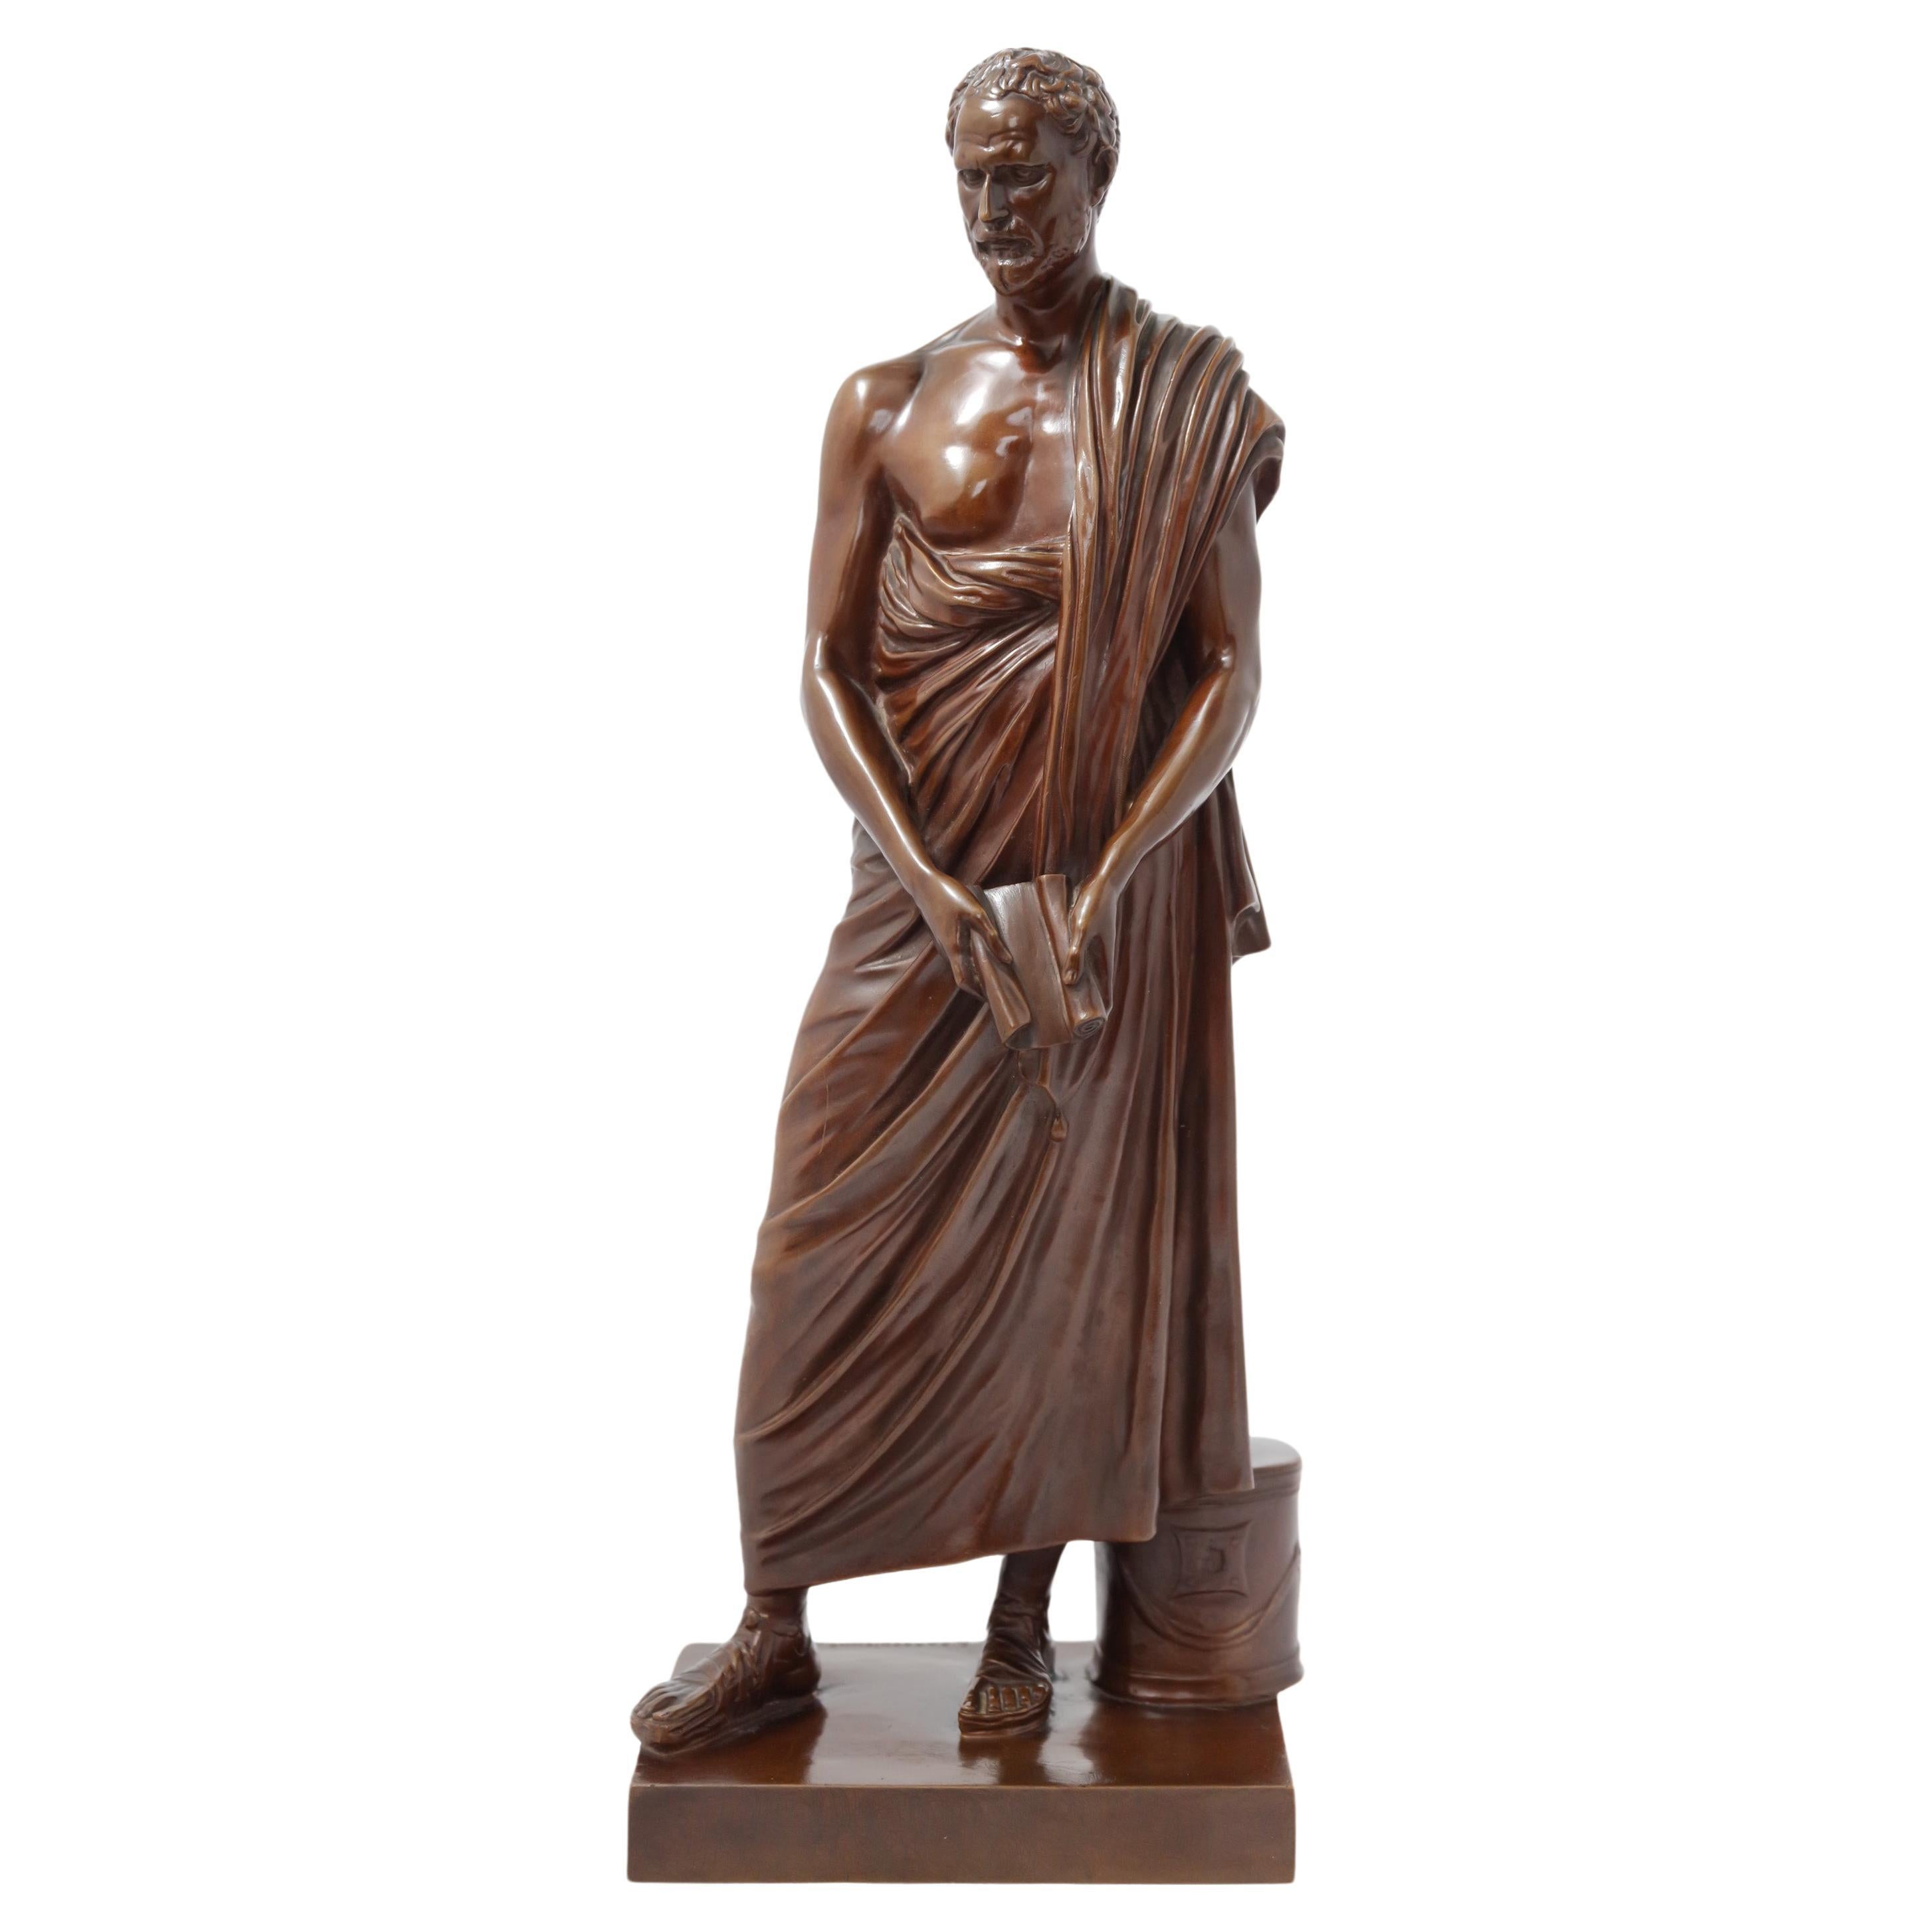 19th Century Demosthenes Bronze Sculpture by Barbedienne Foundry